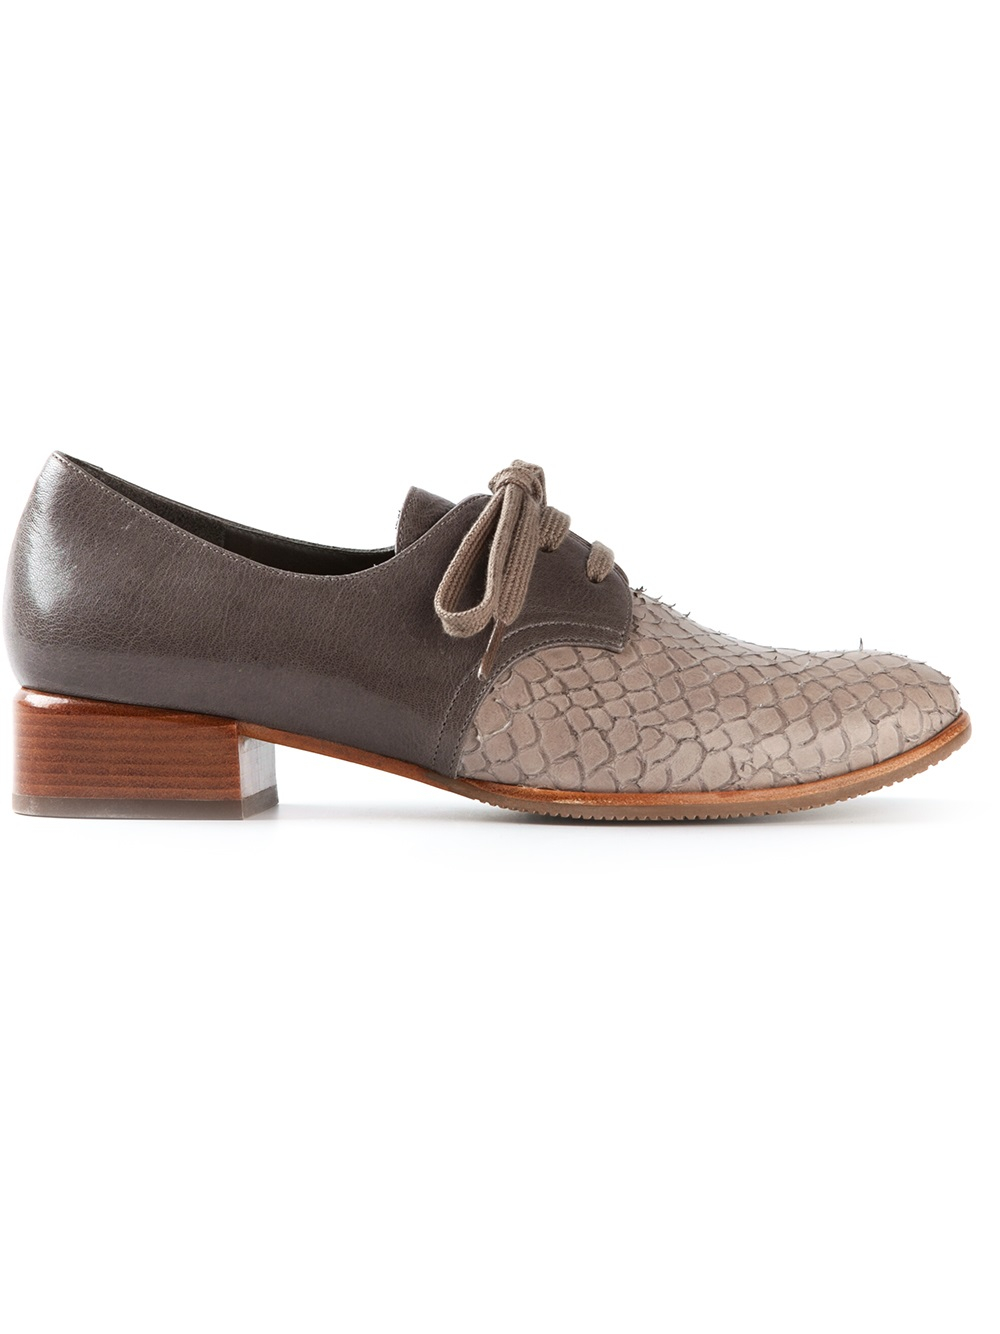 Chie mihara Zamusin Laceup Shoes in Gray | Lyst